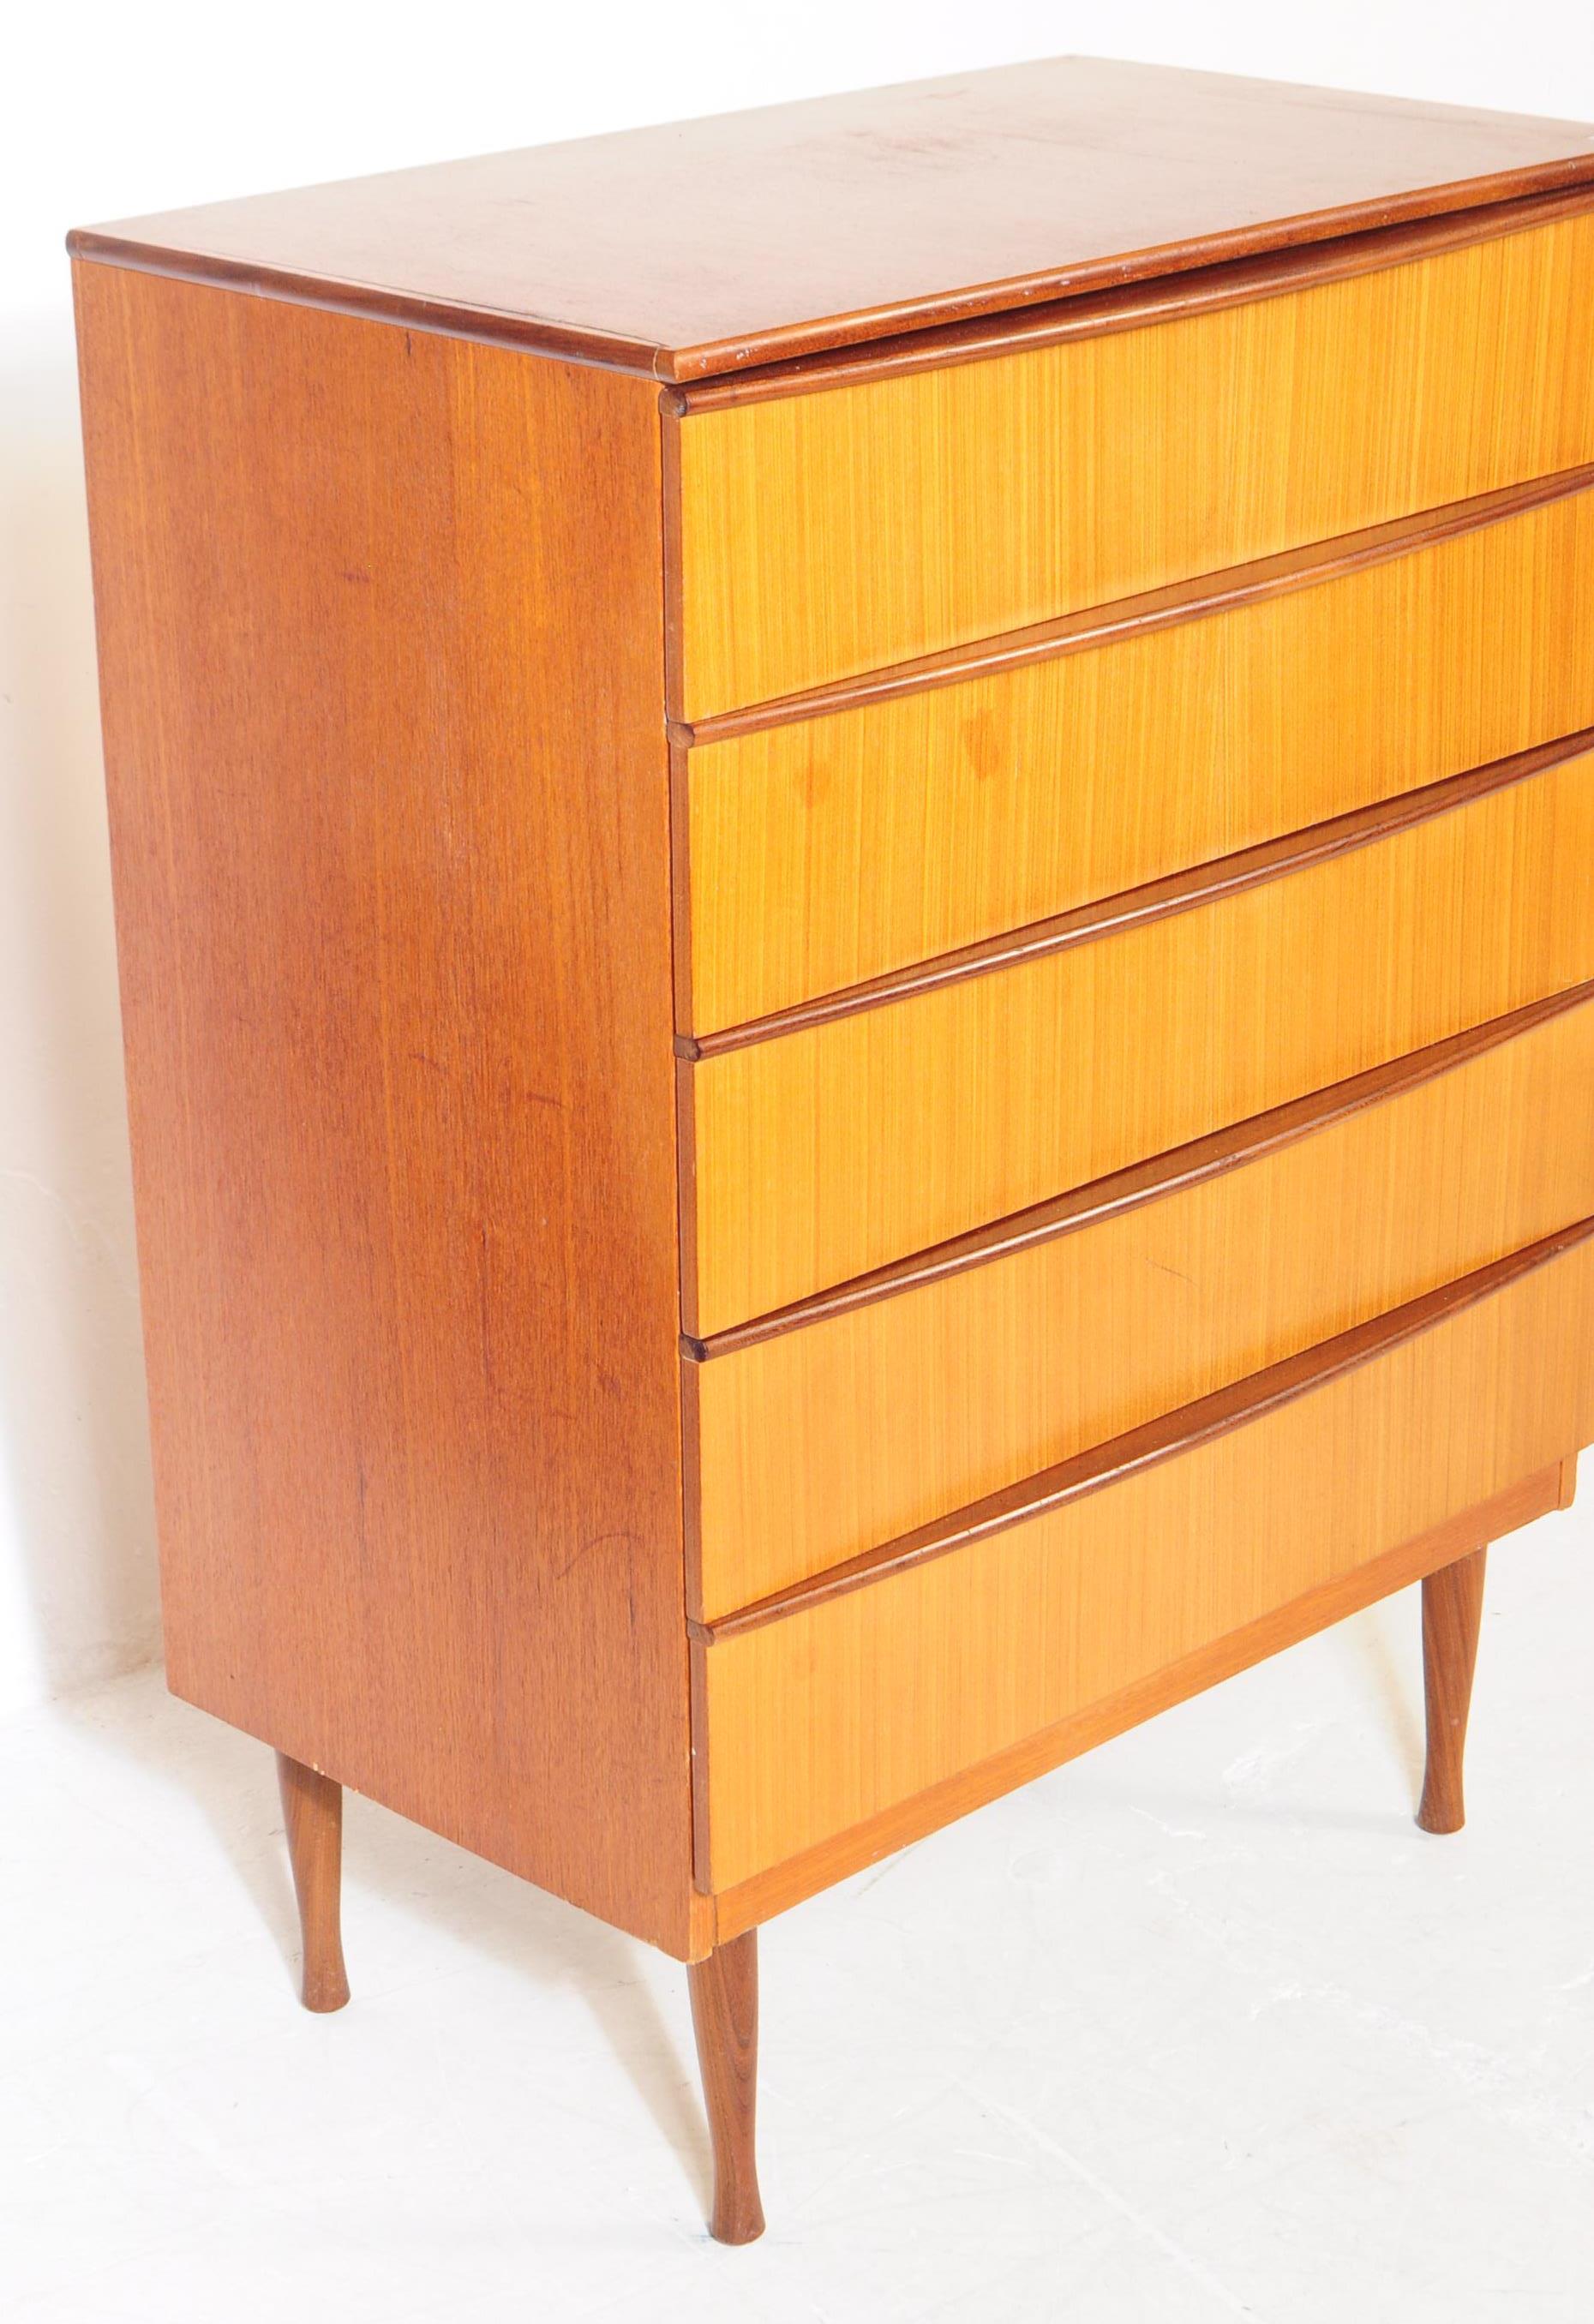 AVALON - MID CENTURY CHEST OF DRAWERS - Image 2 of 7